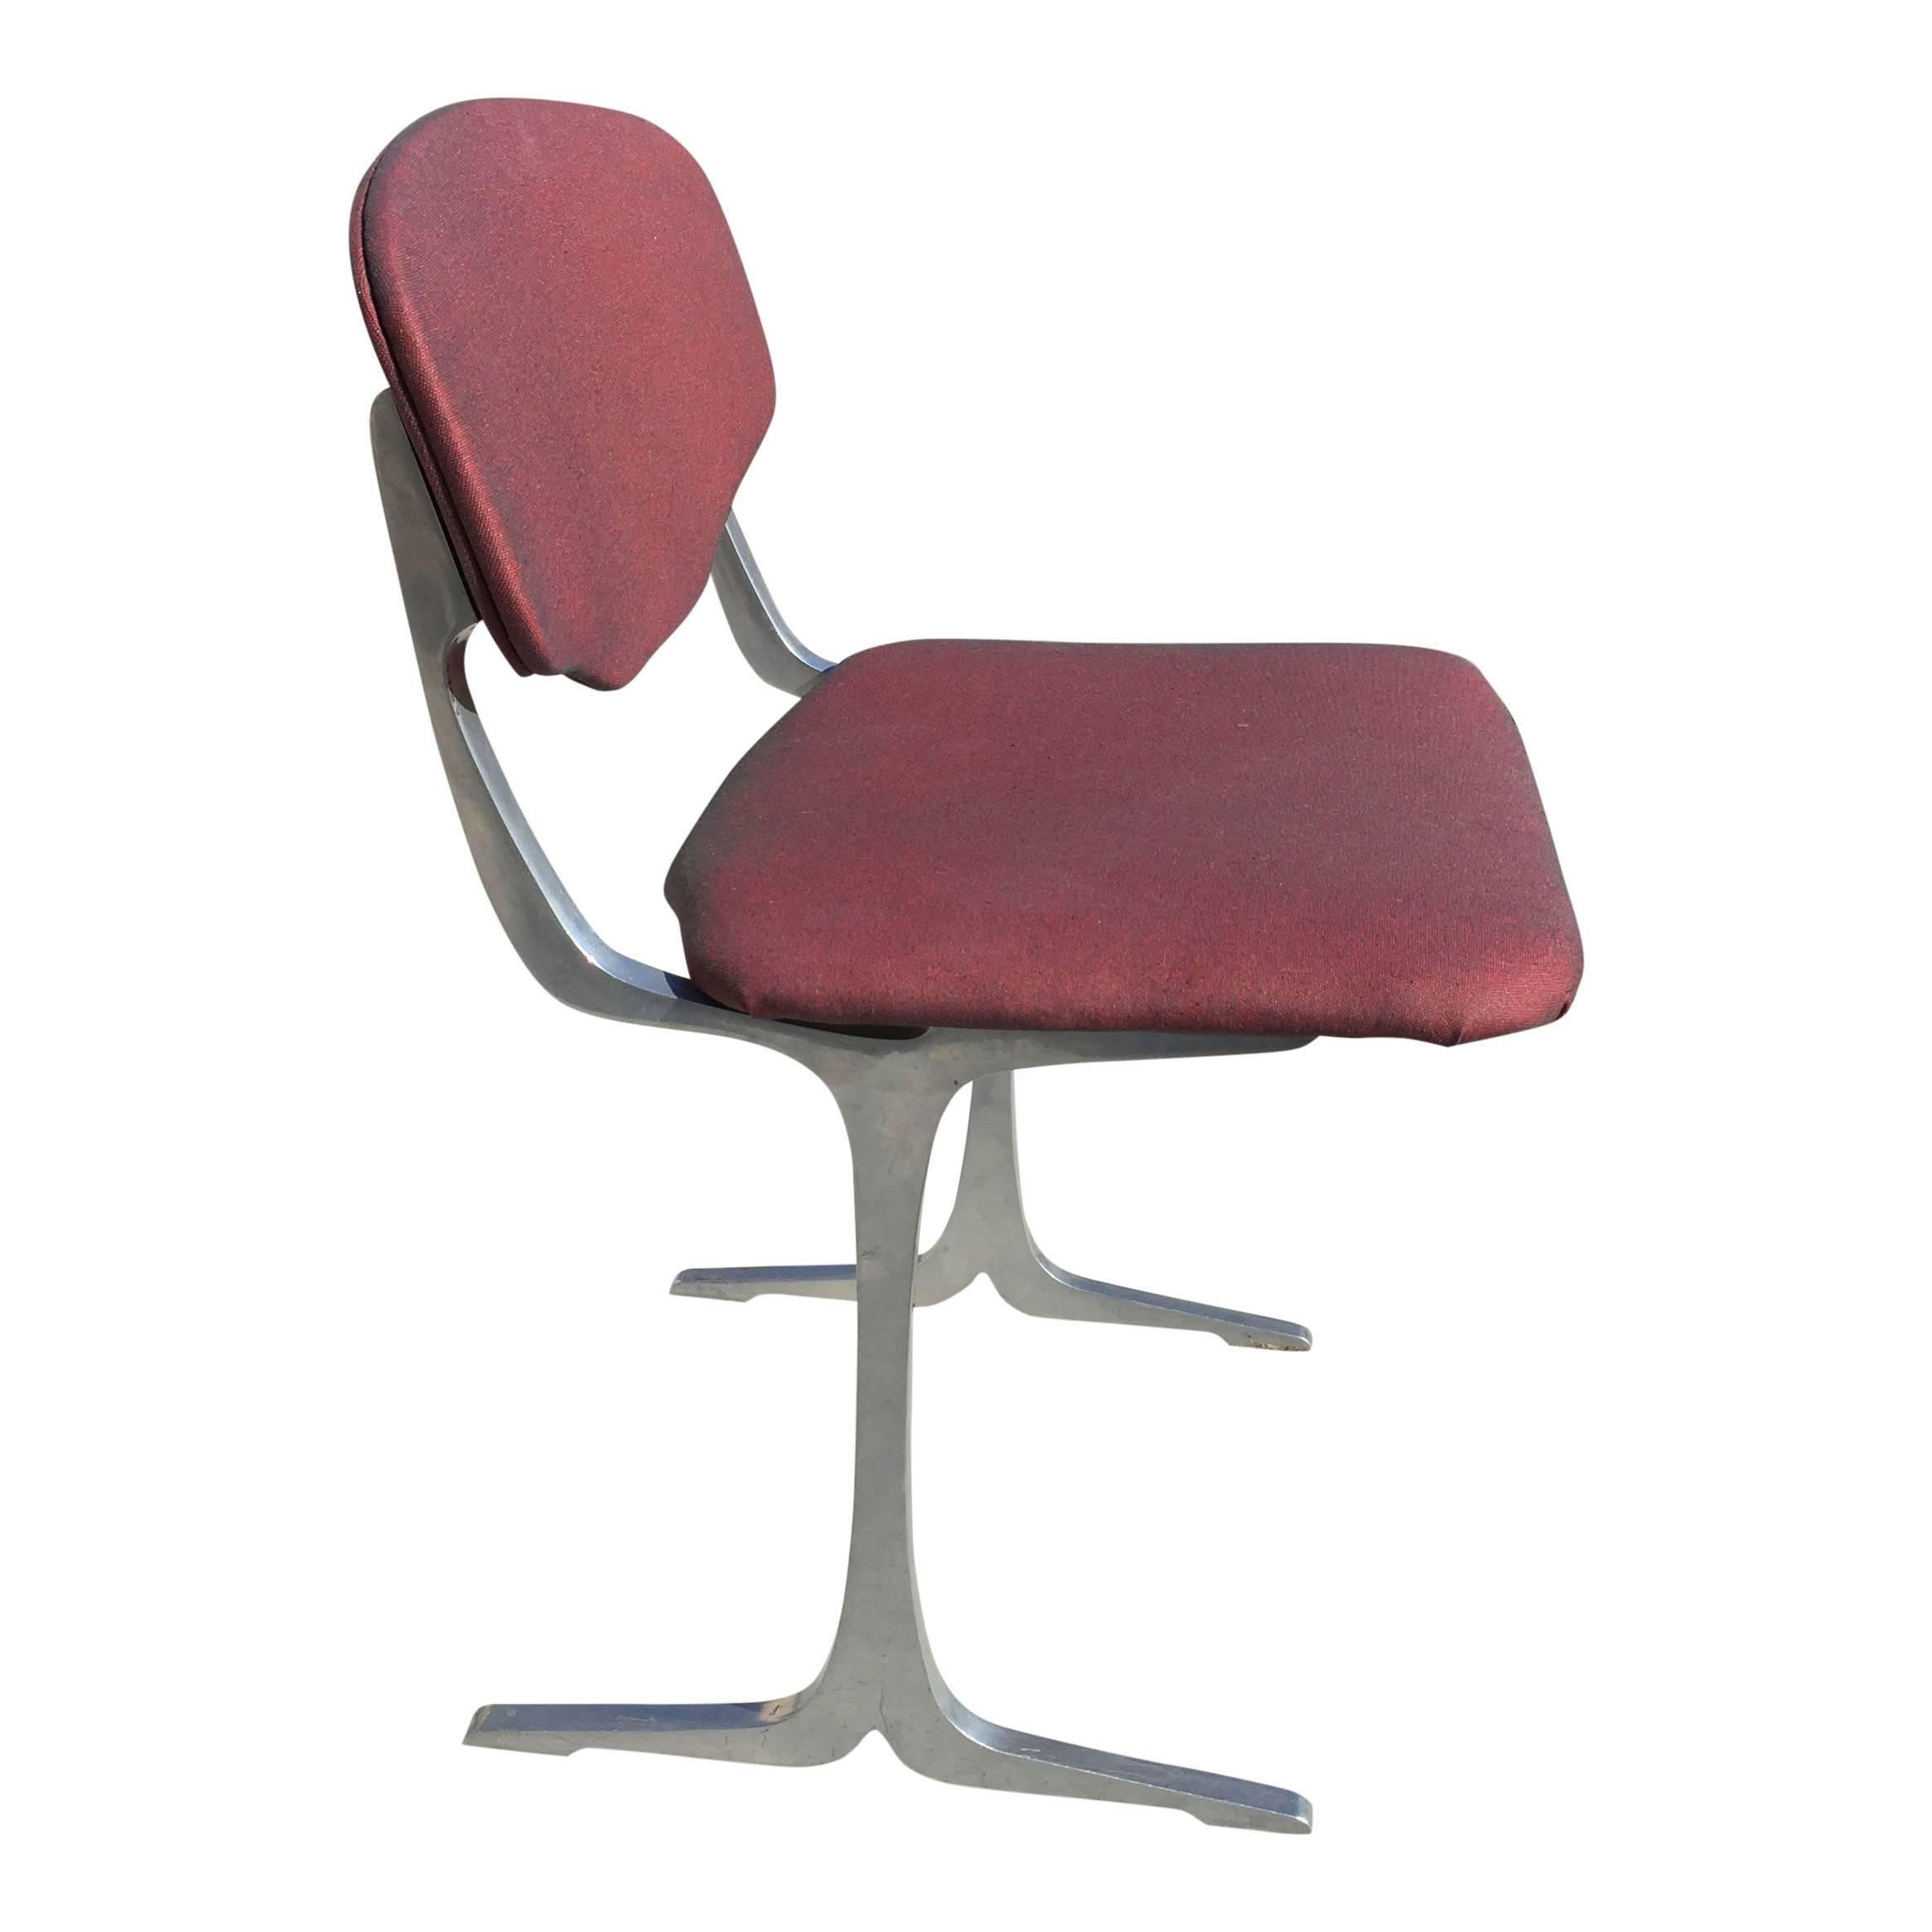 Cast Suite of Four Modernist Stainless Steel and Fabric Chairs, France, 1970s